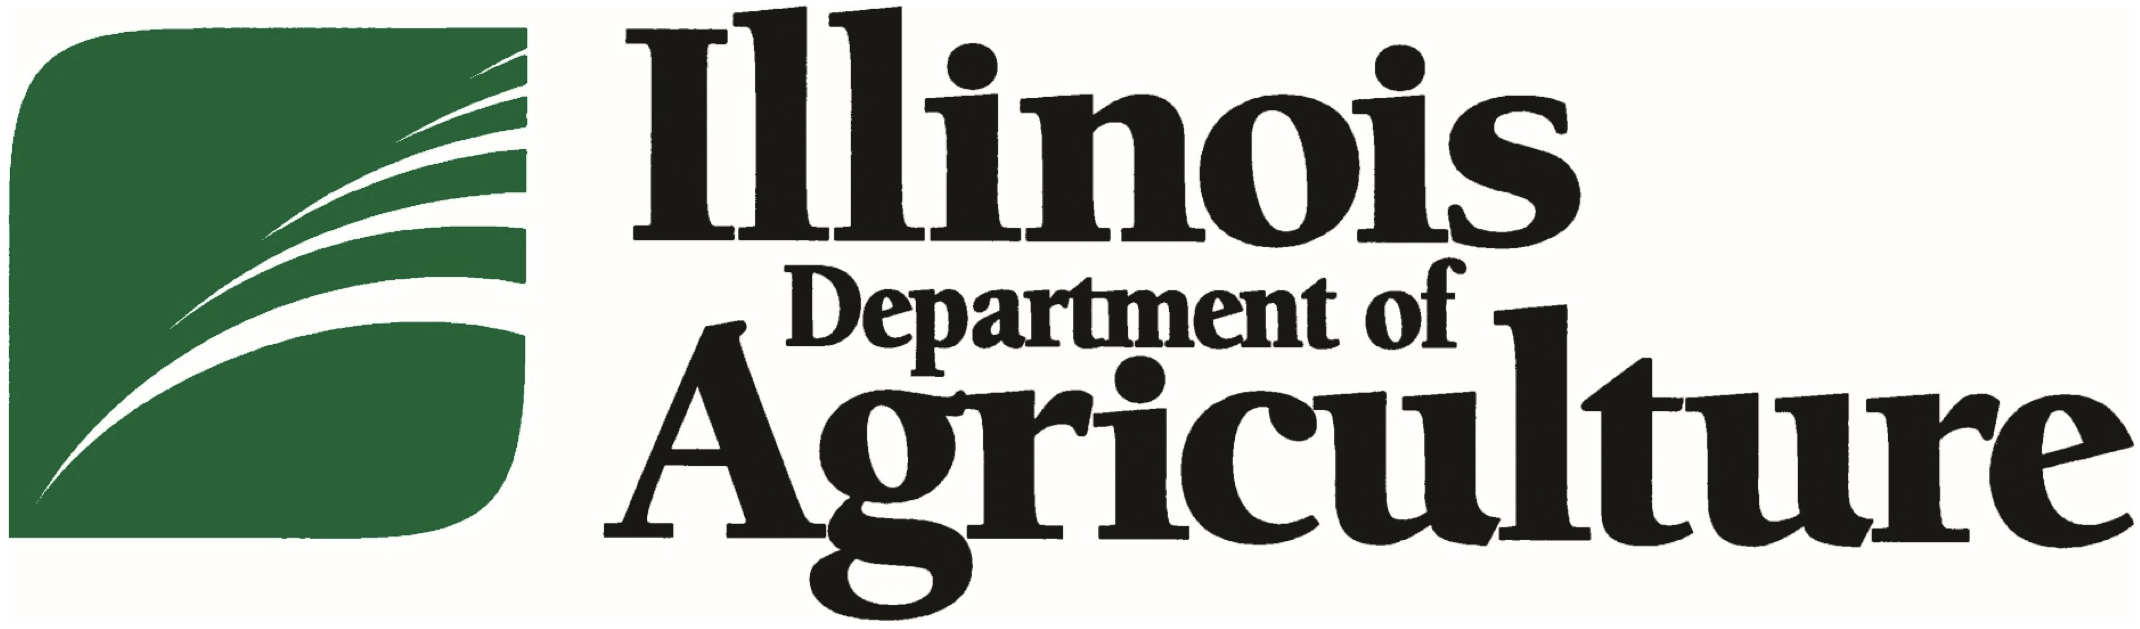 Illinois-Department-of-Agriculture-1